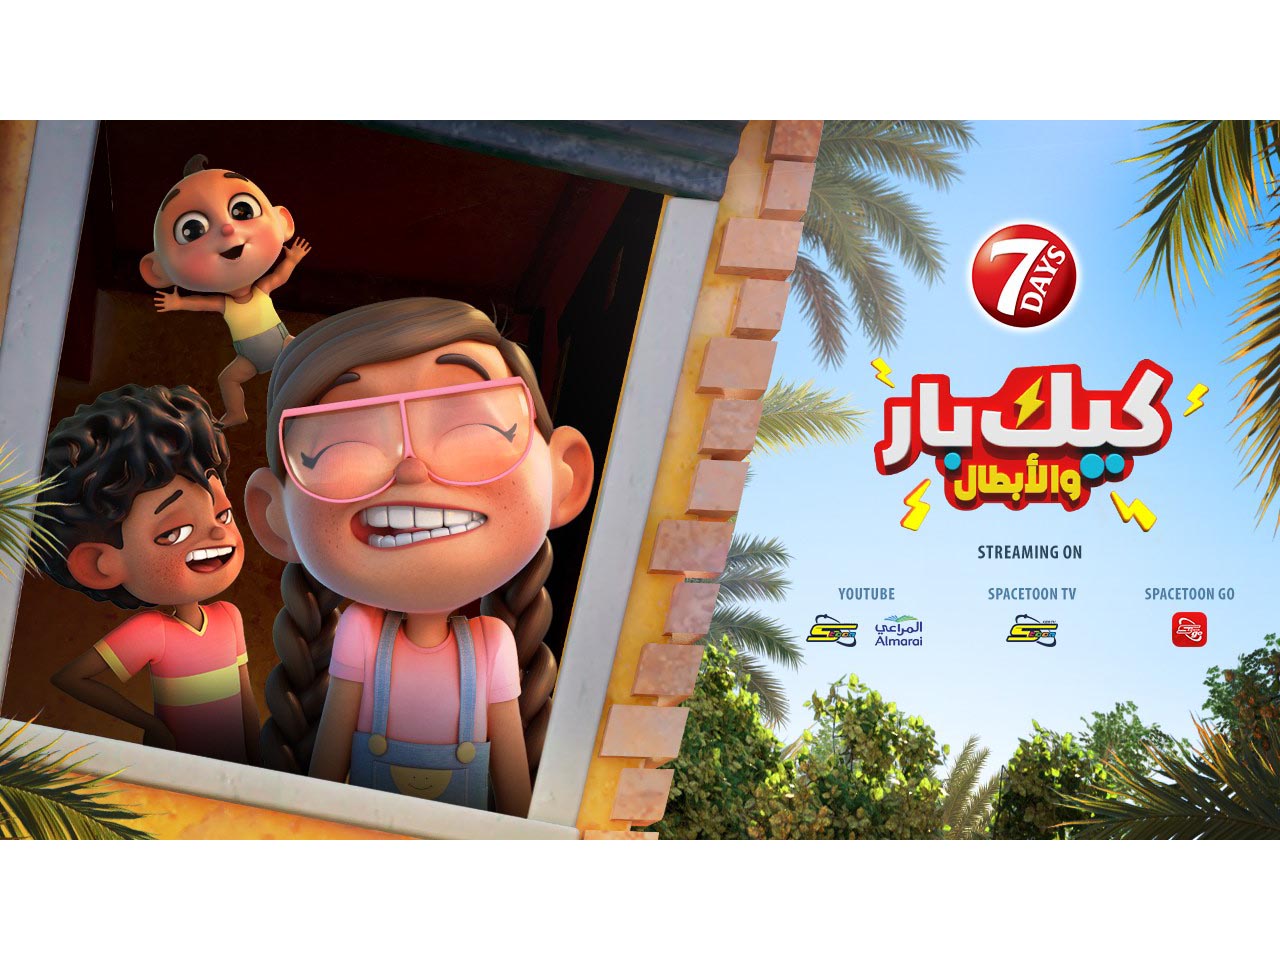 Spacetoon and Almarai's collab achieves great success in the realm of 3D animation